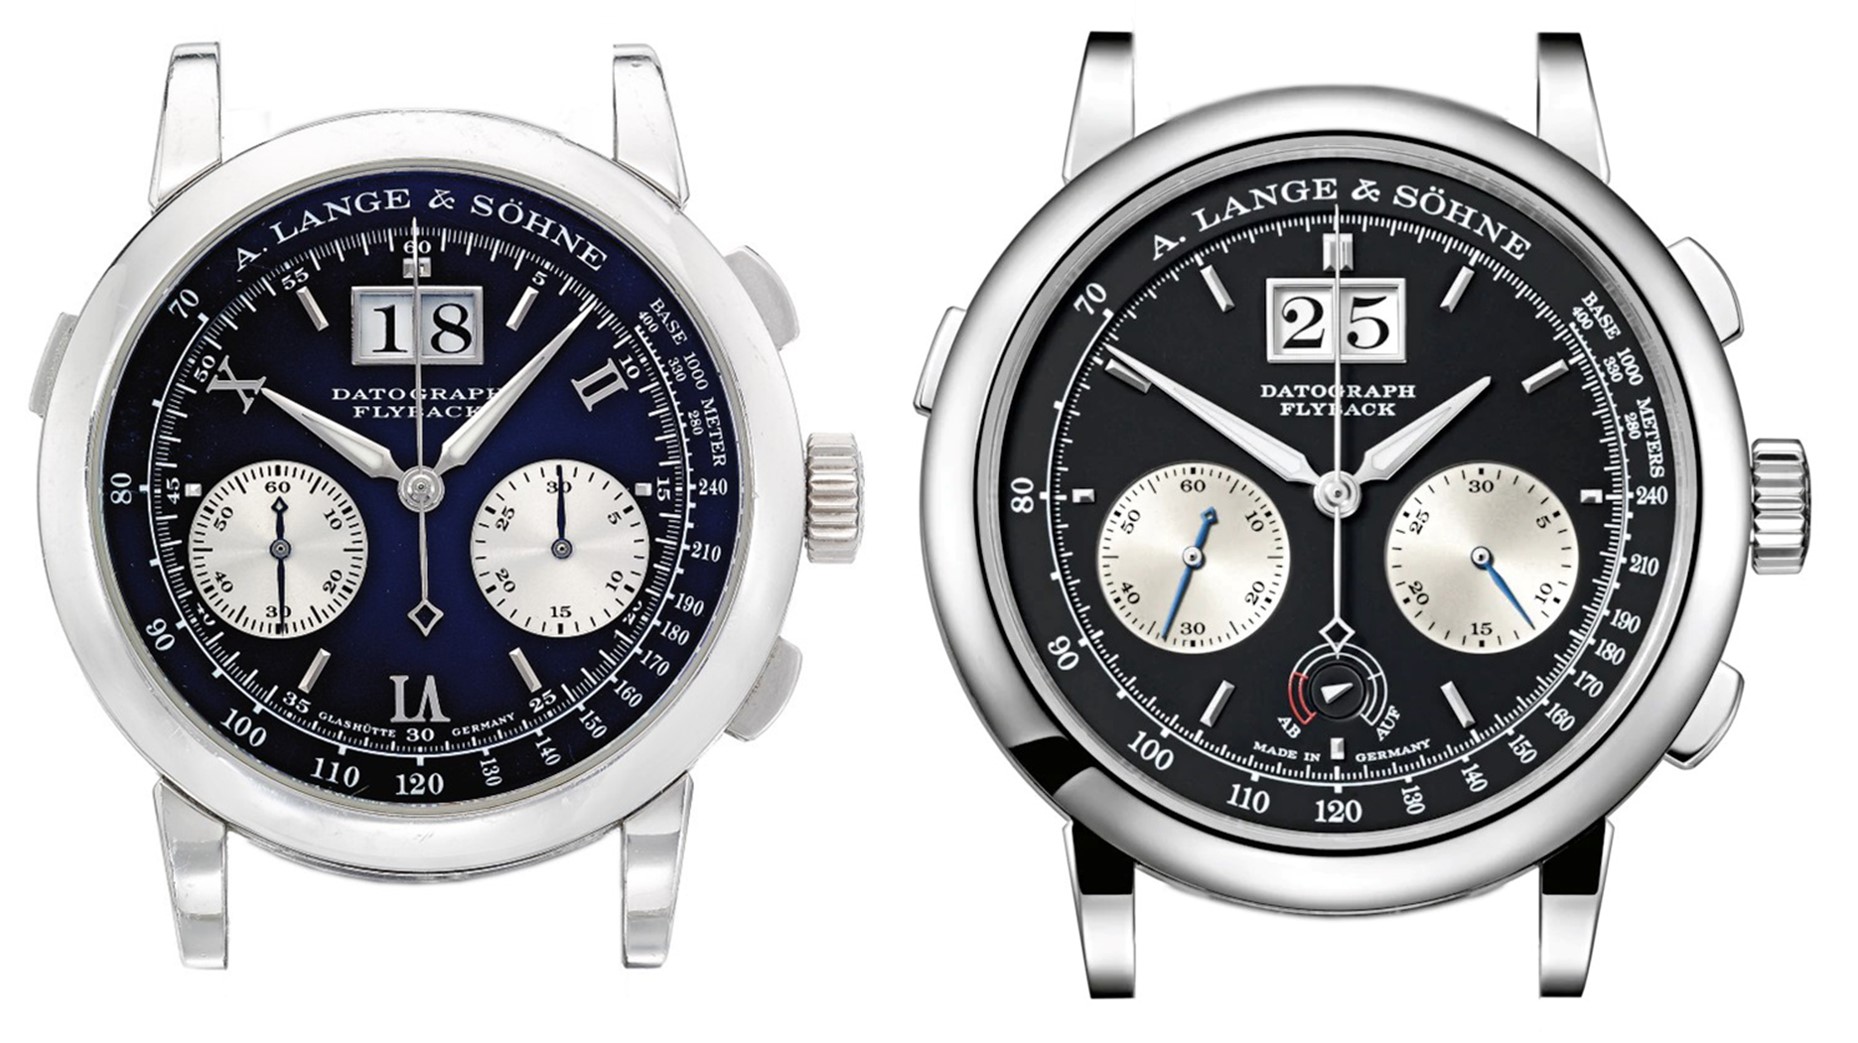 A Lange Söhne Datograph comparison 403.035 and 405.035 side by side